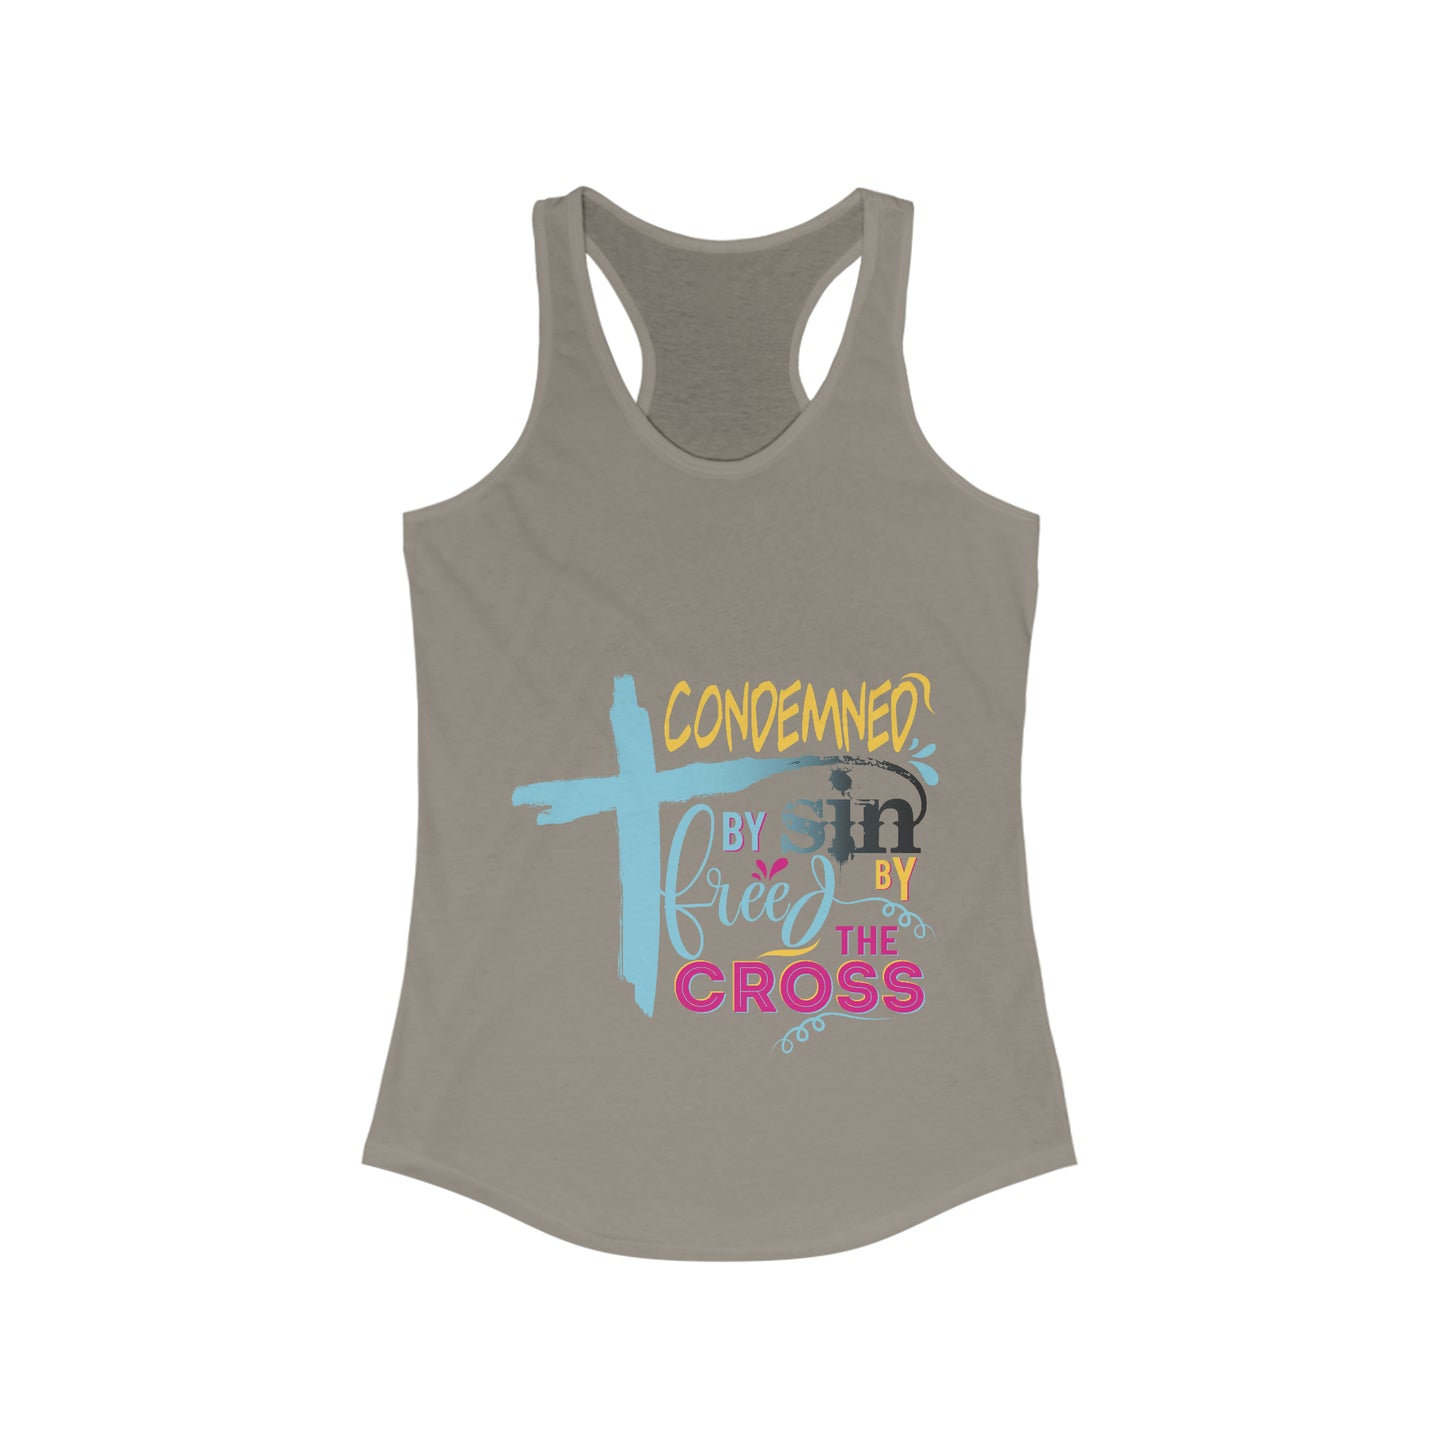 Condemned by Sin Freed By The Cross slim fit tank-top